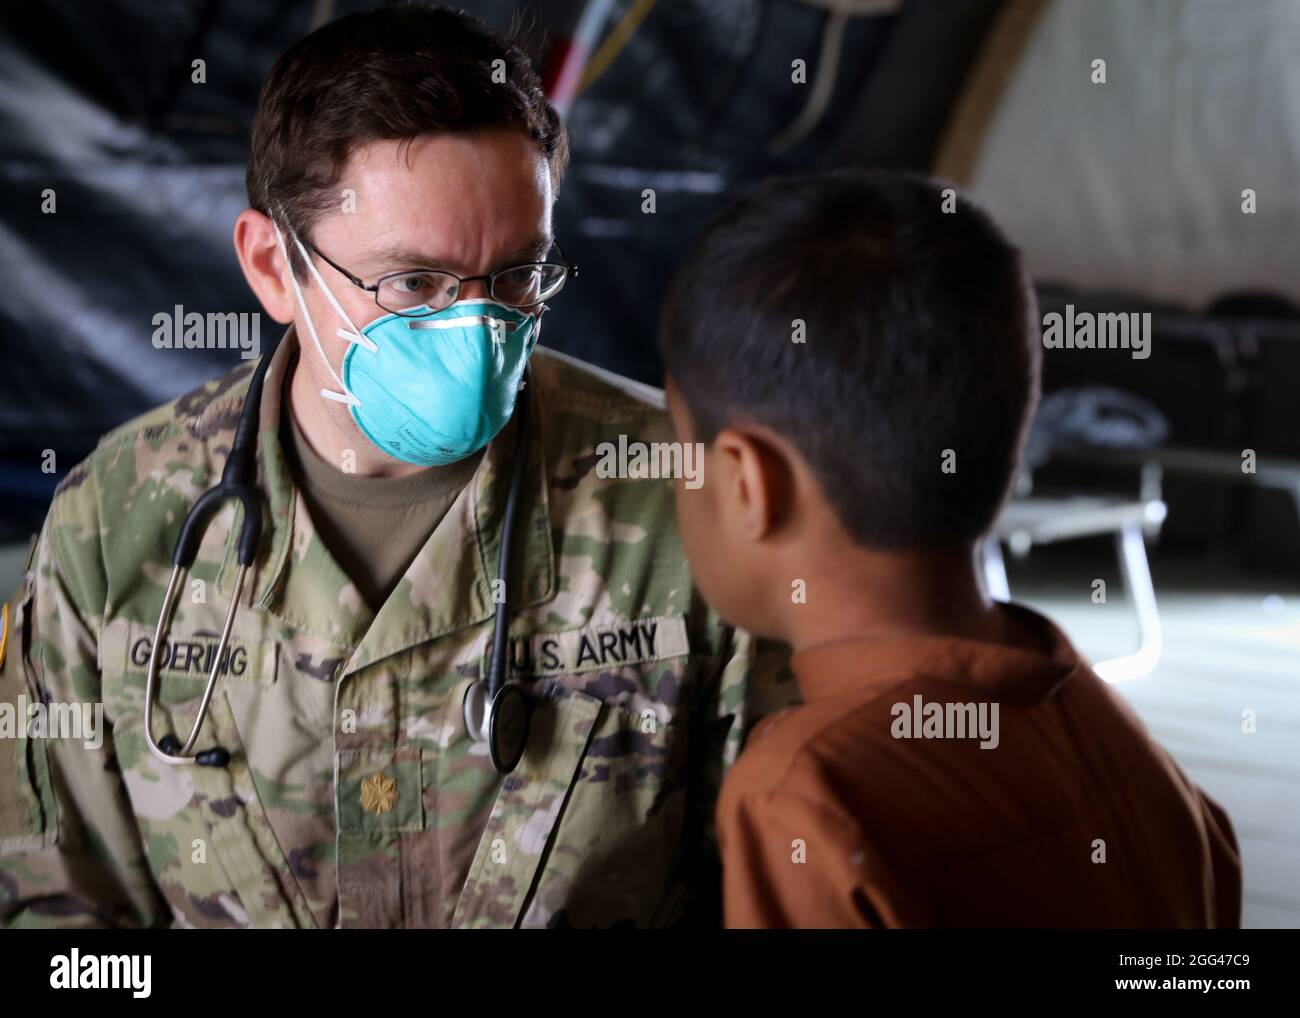 U.S. Army Maj. Philip Goering, a family medicine physician, U.S. Army Health Clinic Wiesbaden, Landstuhl Regional Medical Center, evaluates an Afghan evacuee seeking medical assistance as part of medical operations in support of Operation Allies Refuge at Ramstein Air Base, Germany, Aug. 26. The medical operations are part of U.S. Armed Forces medical efforts in response to the Afghanistan evacuations at Ramstein Air Base, which has transformed itself into the logistical hub for the evacuation of people from Afghanistan. Stock Photo